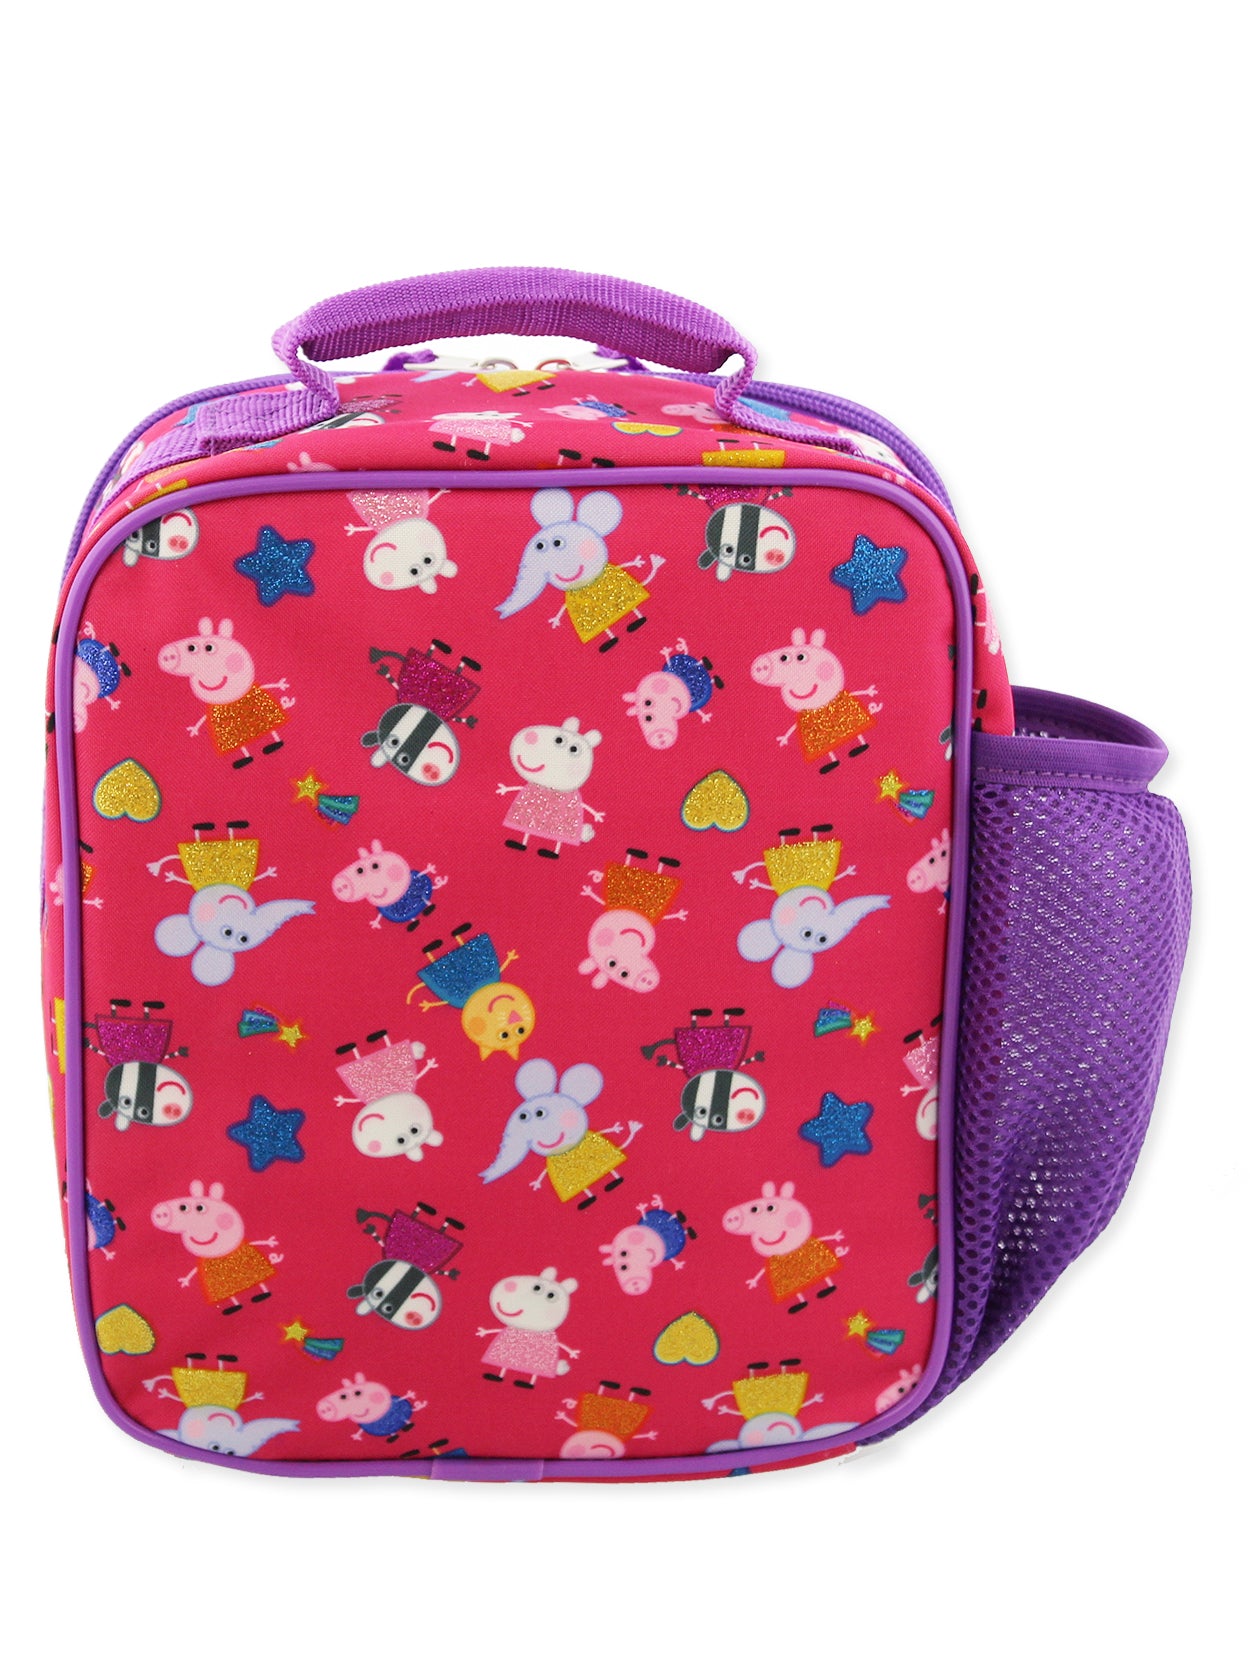  Accessories Innovation Peppa Pig Insulated Lunch Box Cooler:  Home & Kitchen